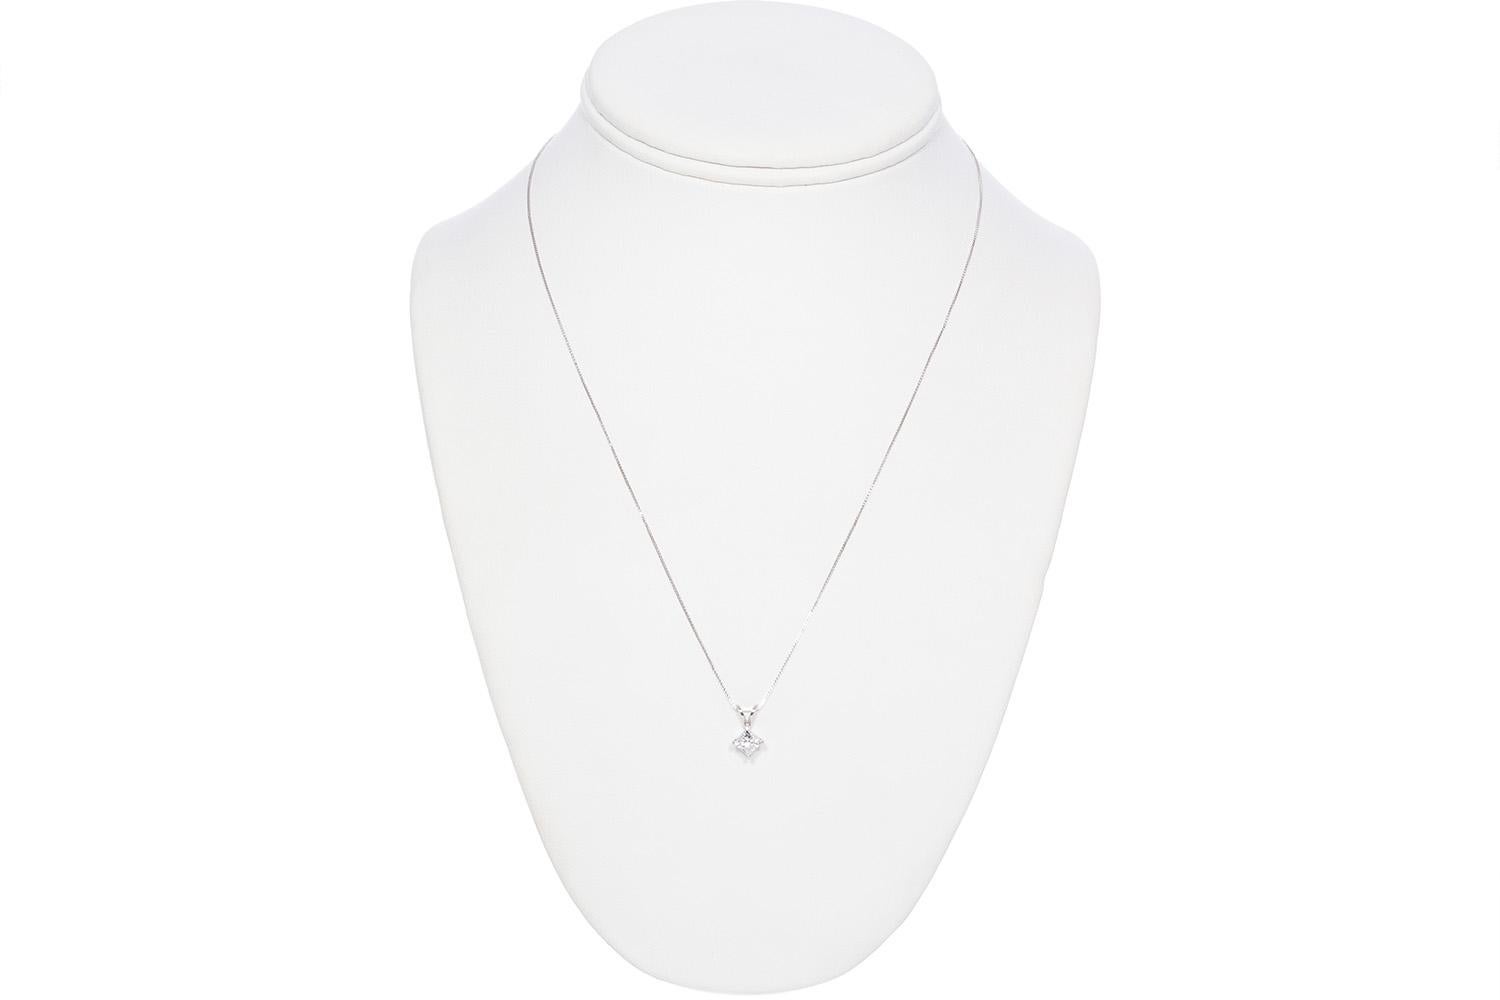 We are pleased to present this Ladies GIA Certified 14k E/VVS2 White Gold & Princess Diamond Pendant Necklace. This cute piece features a GIA certified and laser inscribed colorless and near flawless 0.60ct E/VVS2 princess cut diamond pendant on a